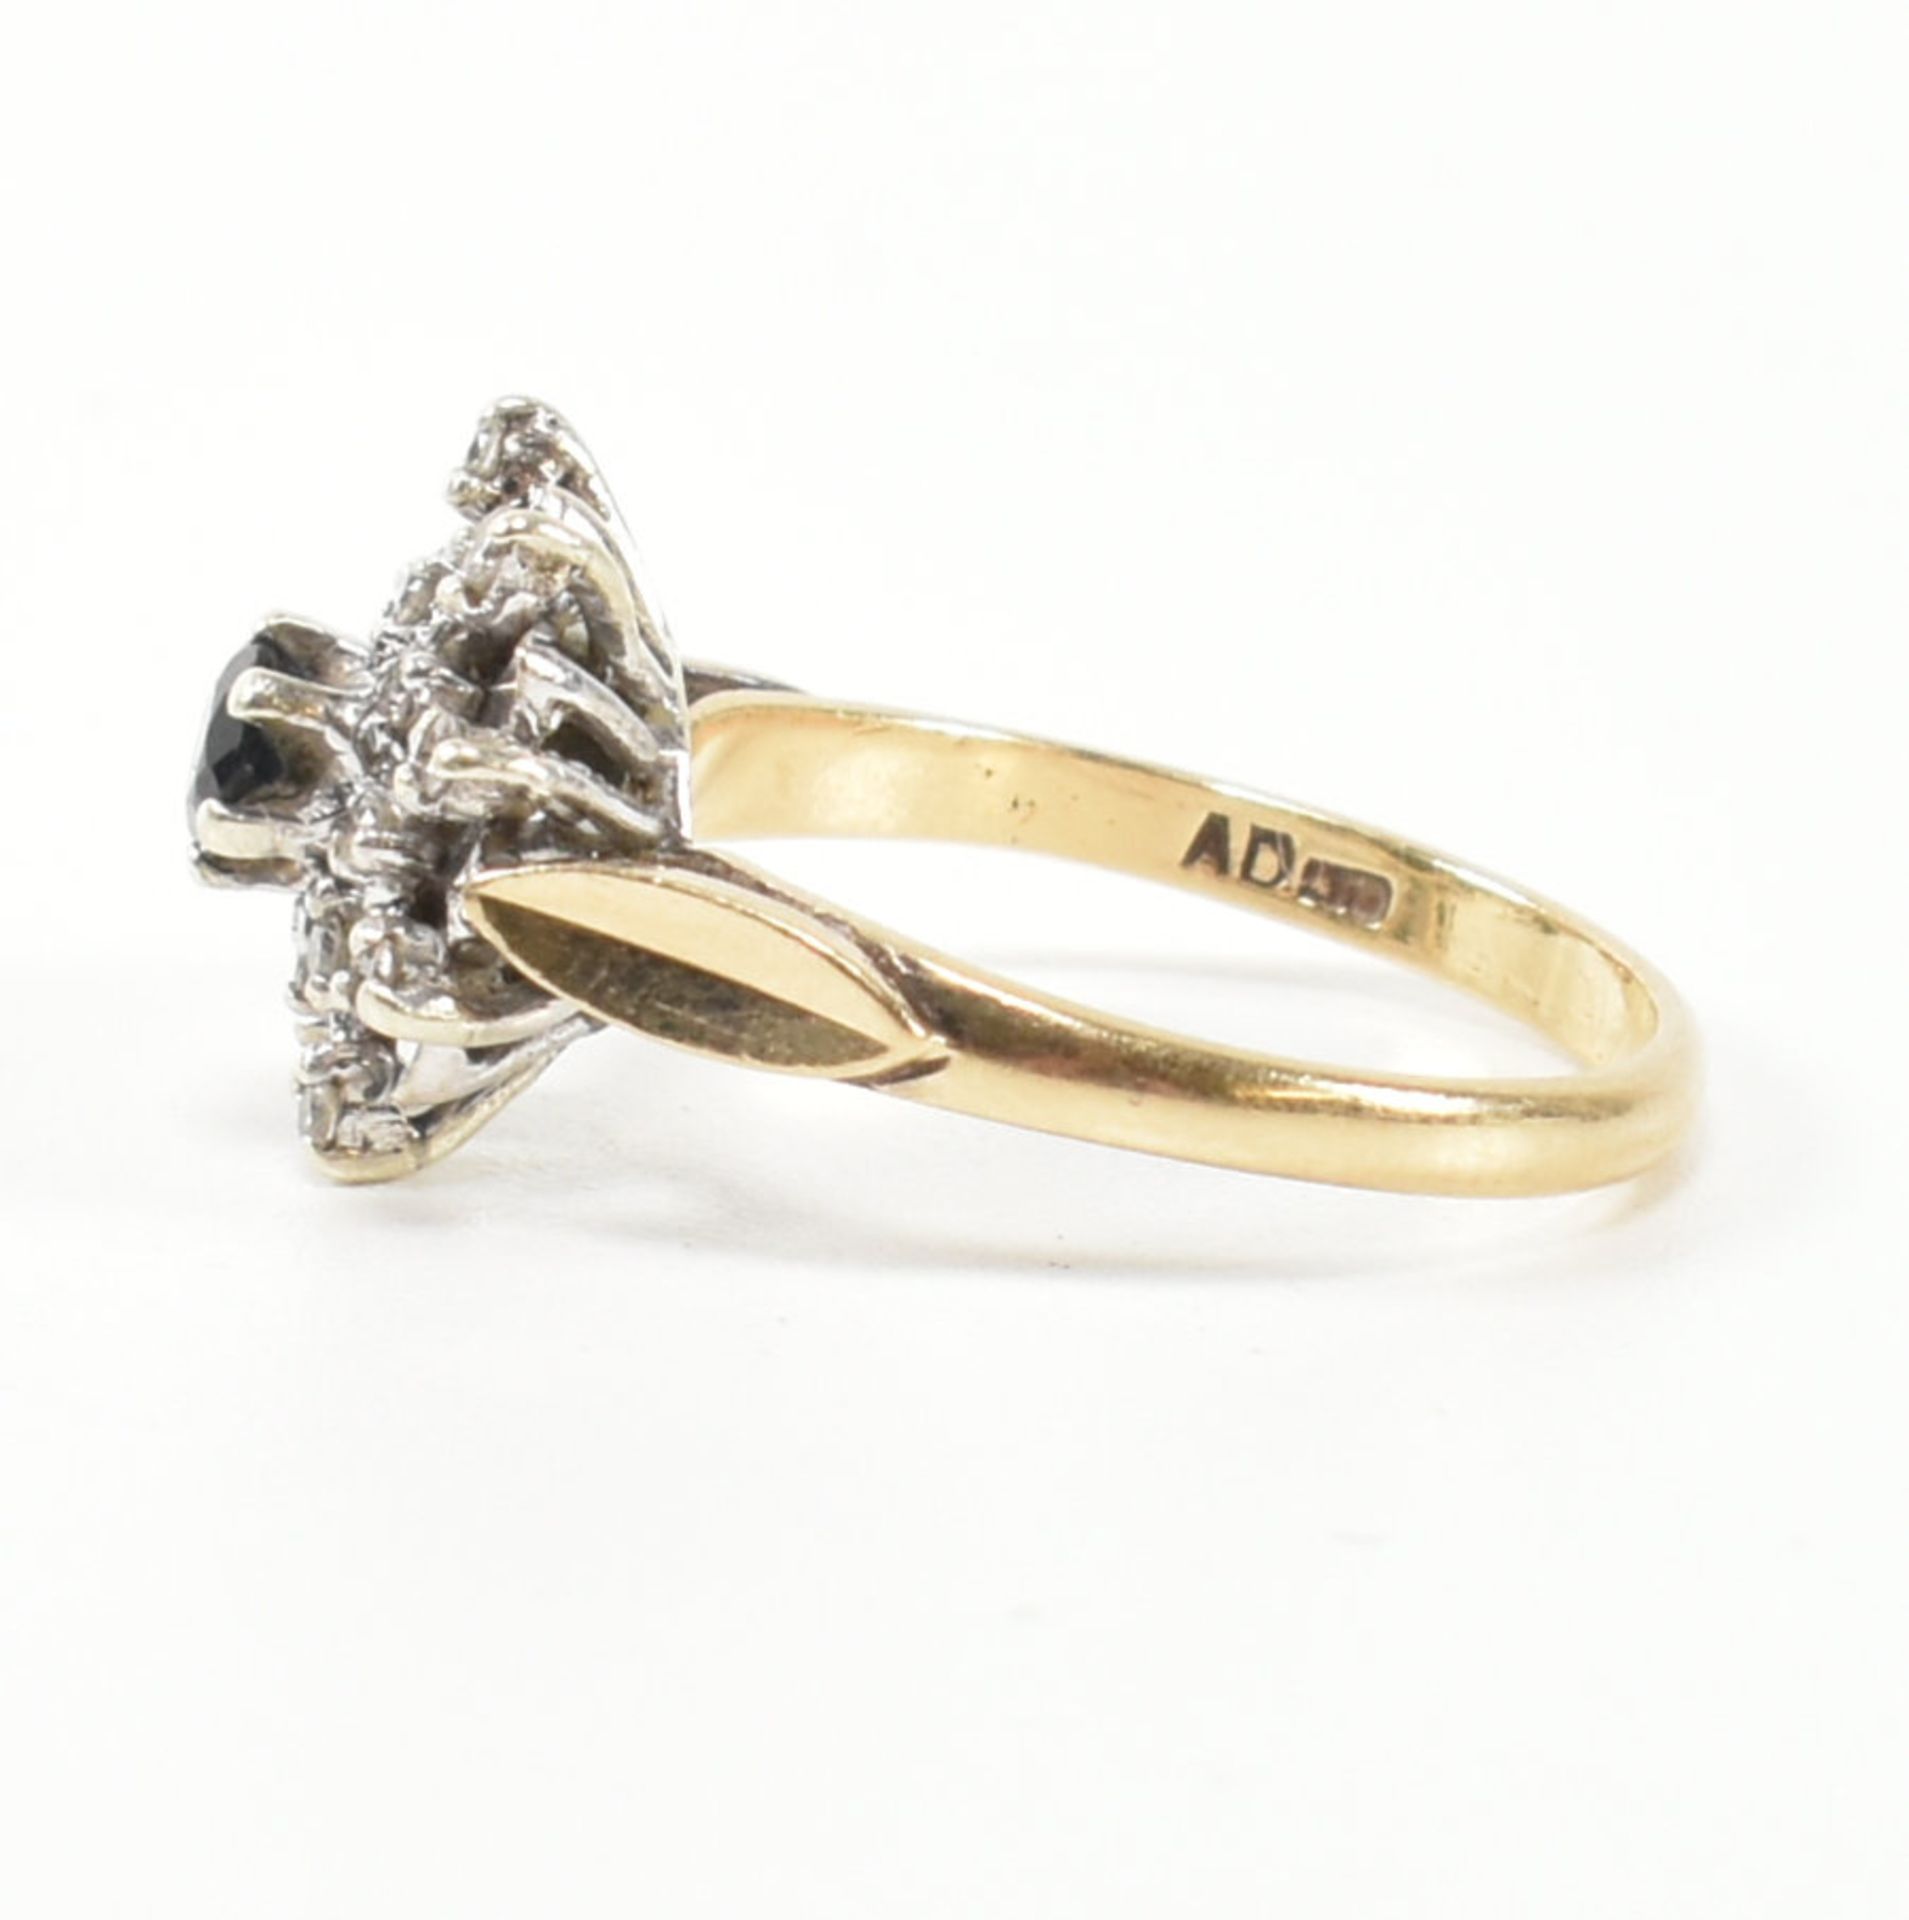 HALLMARKED 9CT GOLD DIAMOND & SAPPHIRE CLUSTER RING - Image 3 of 7